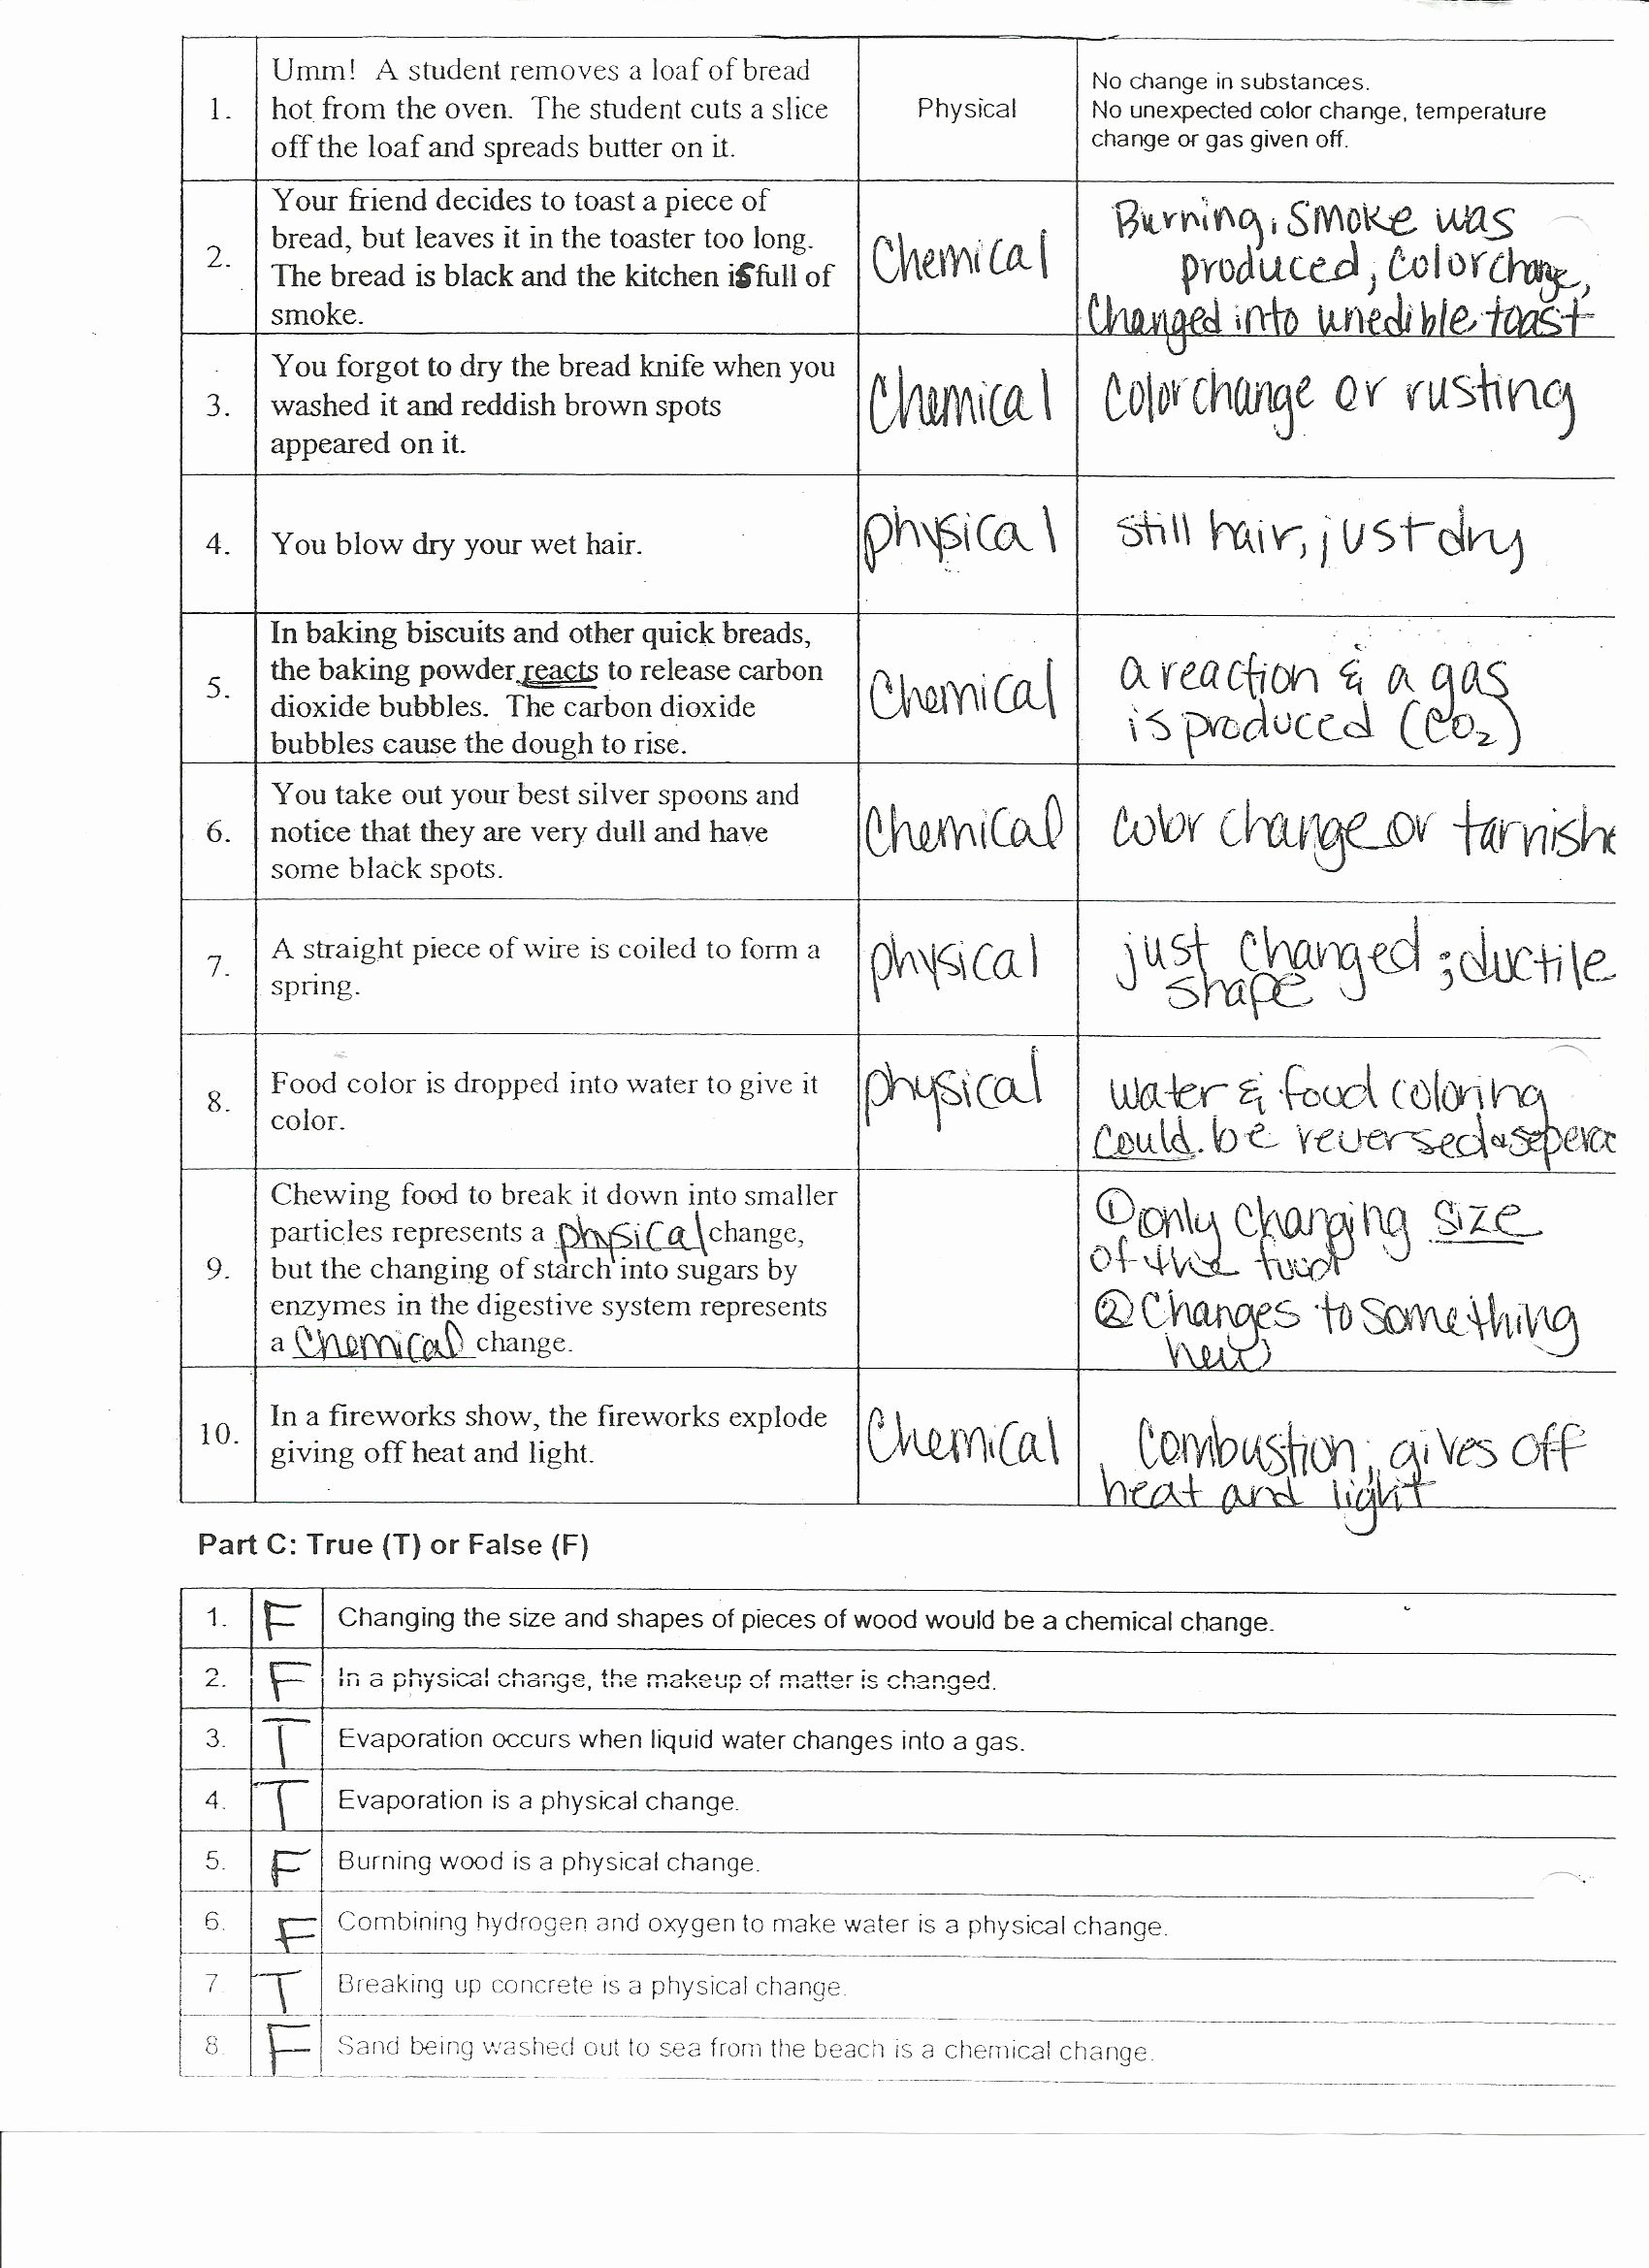 Physical and Chemical Changes Worksheet New 35 Chemical and Physical Changes Worksheet Physical and